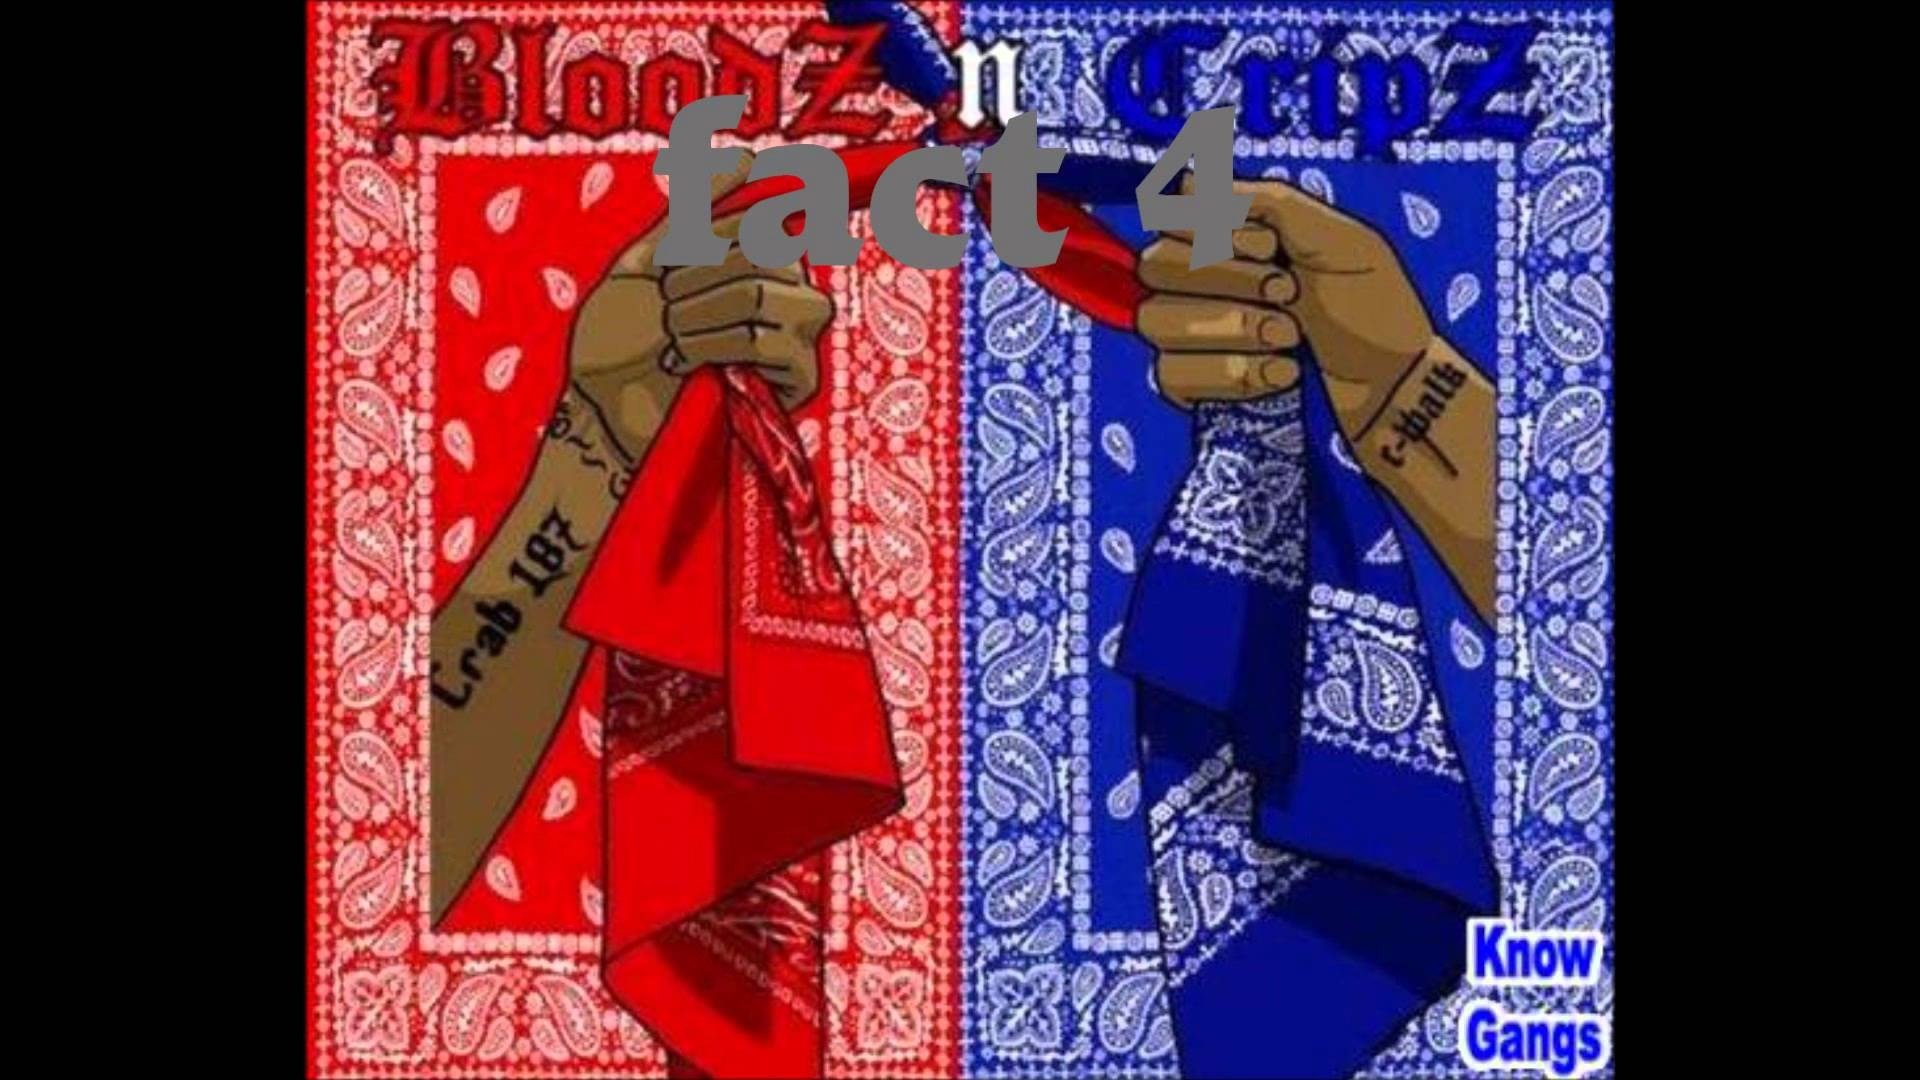 Crip Wallpaper Browse Crip Wallpaper with collections of Blue Crip Crip  Cartoon Gangster Los Angeles httpsw  Gang signs Crip tattoos Thug  life wallpaper